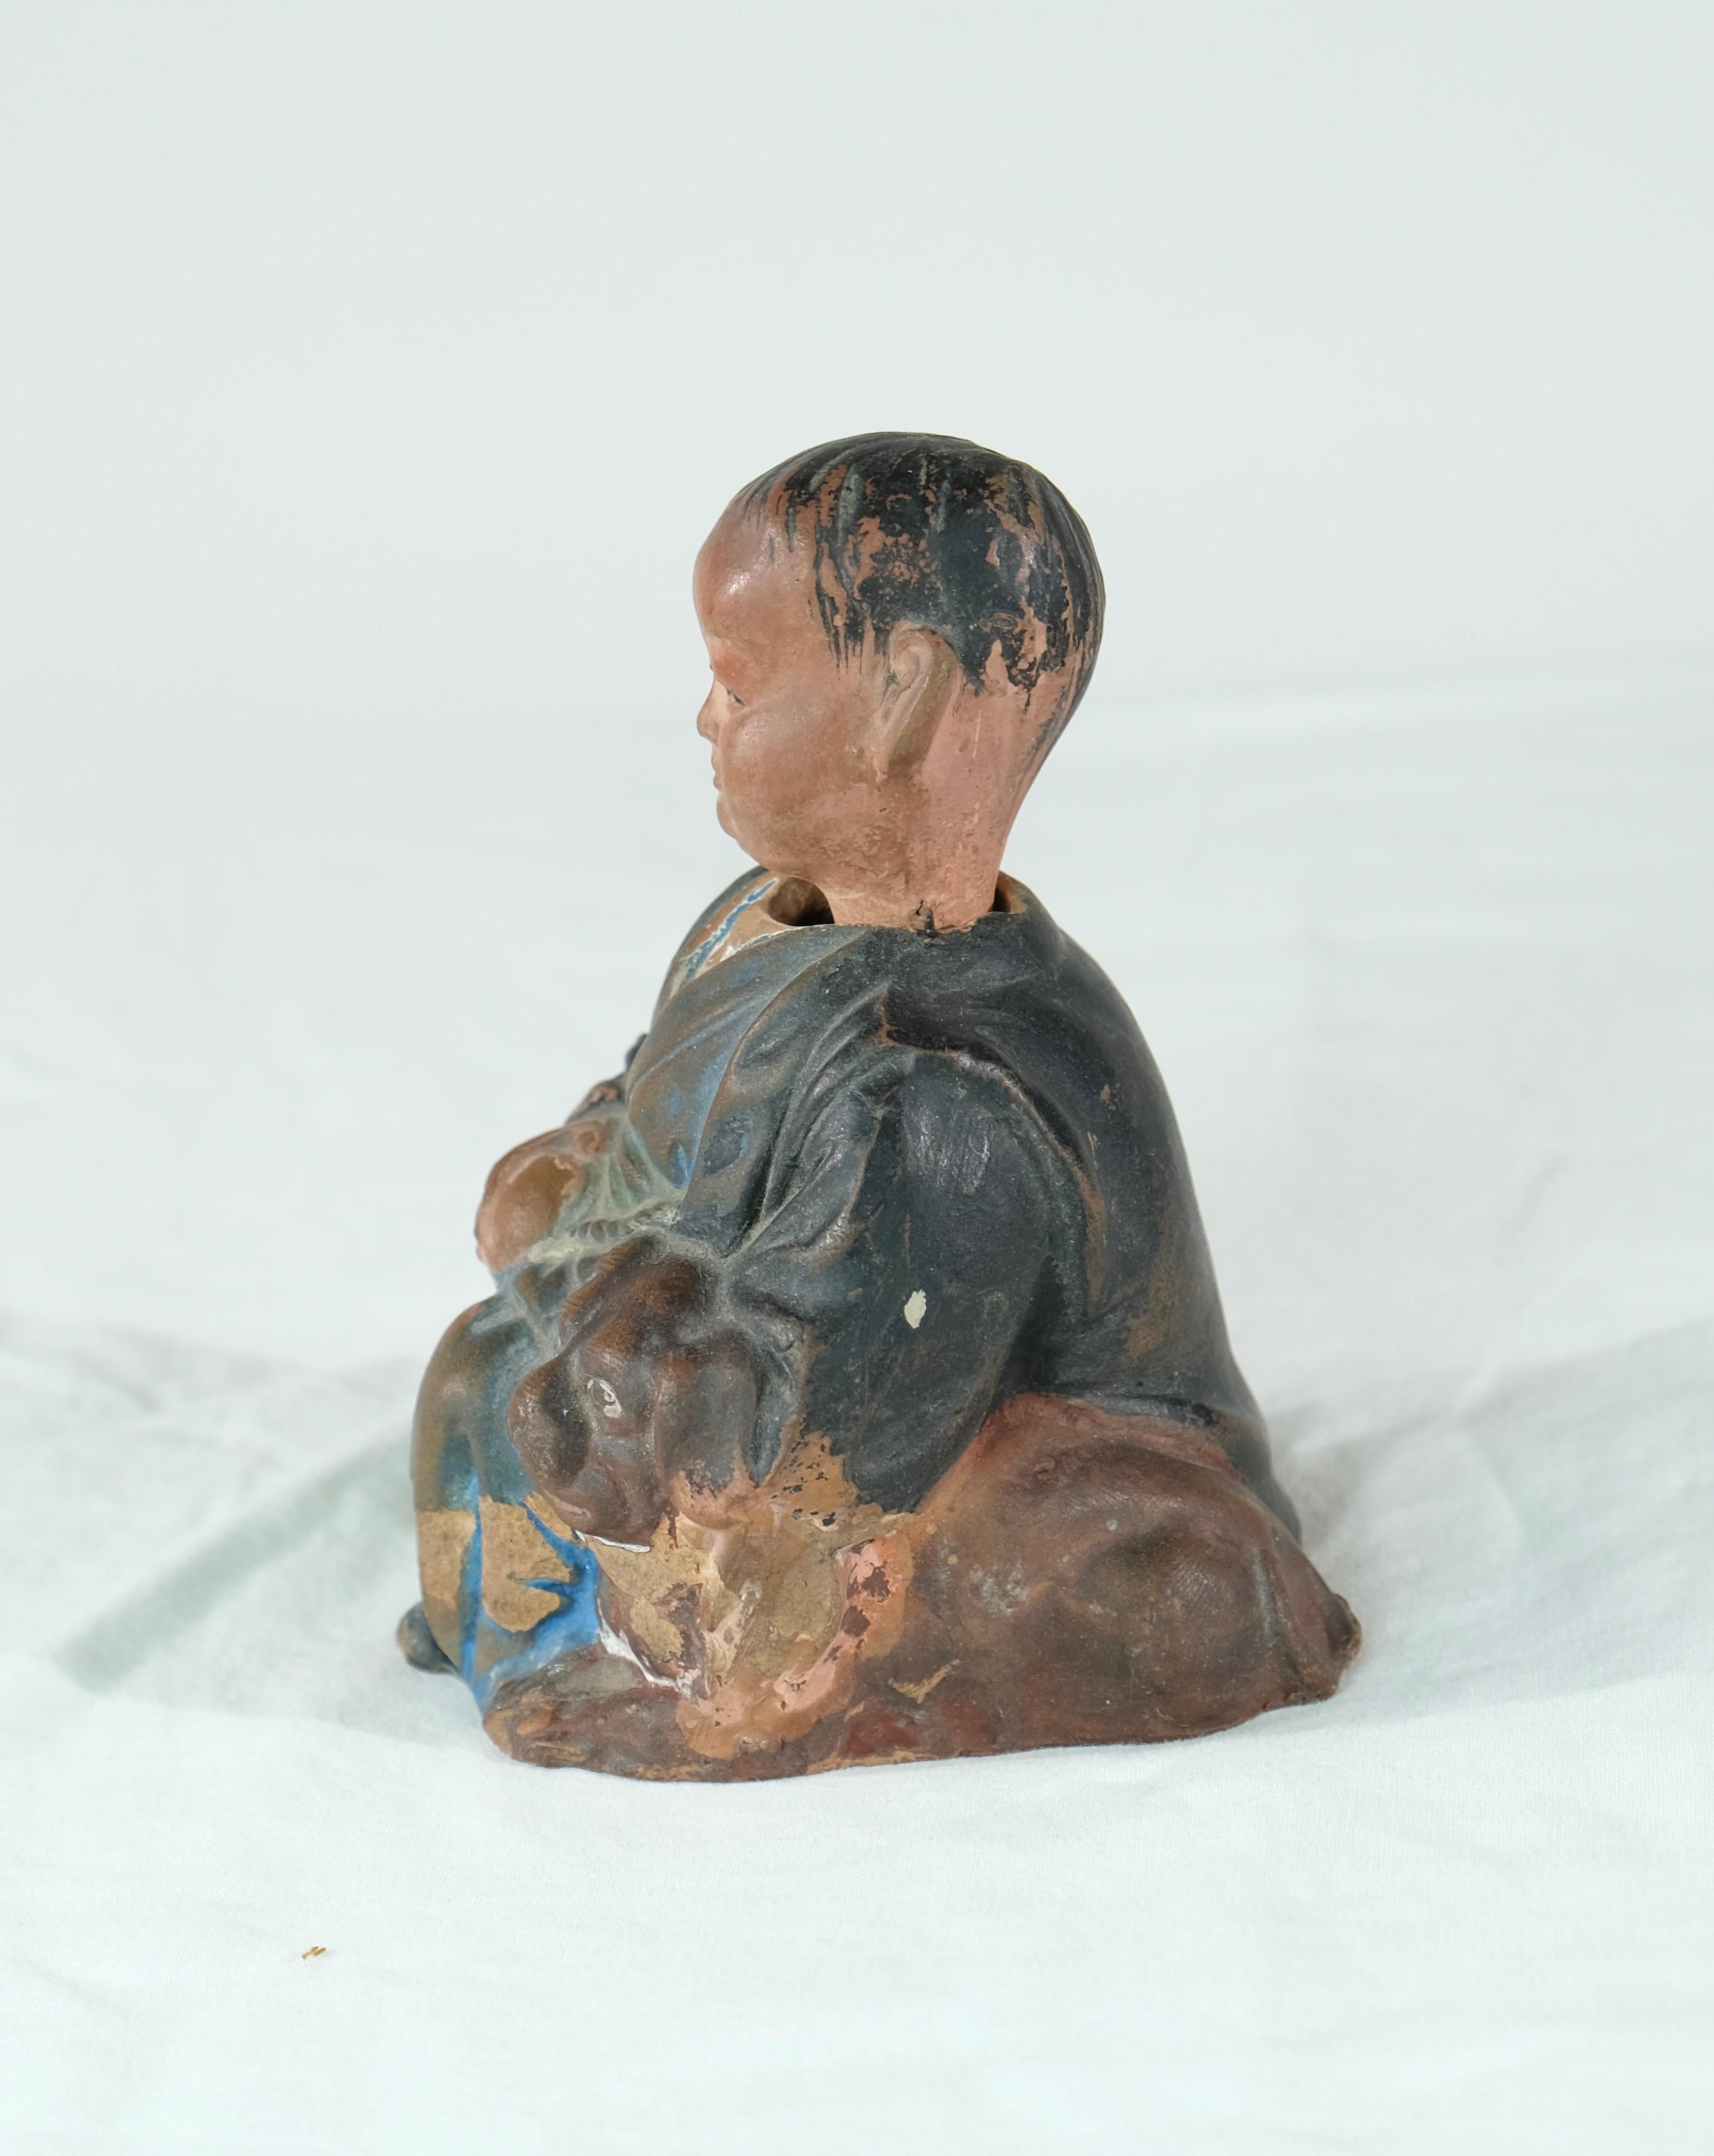 A charming head doll made of painted clay depicting a young boy. Below the doll is a note in Swedish that it was given as cristmas-present in 1925.